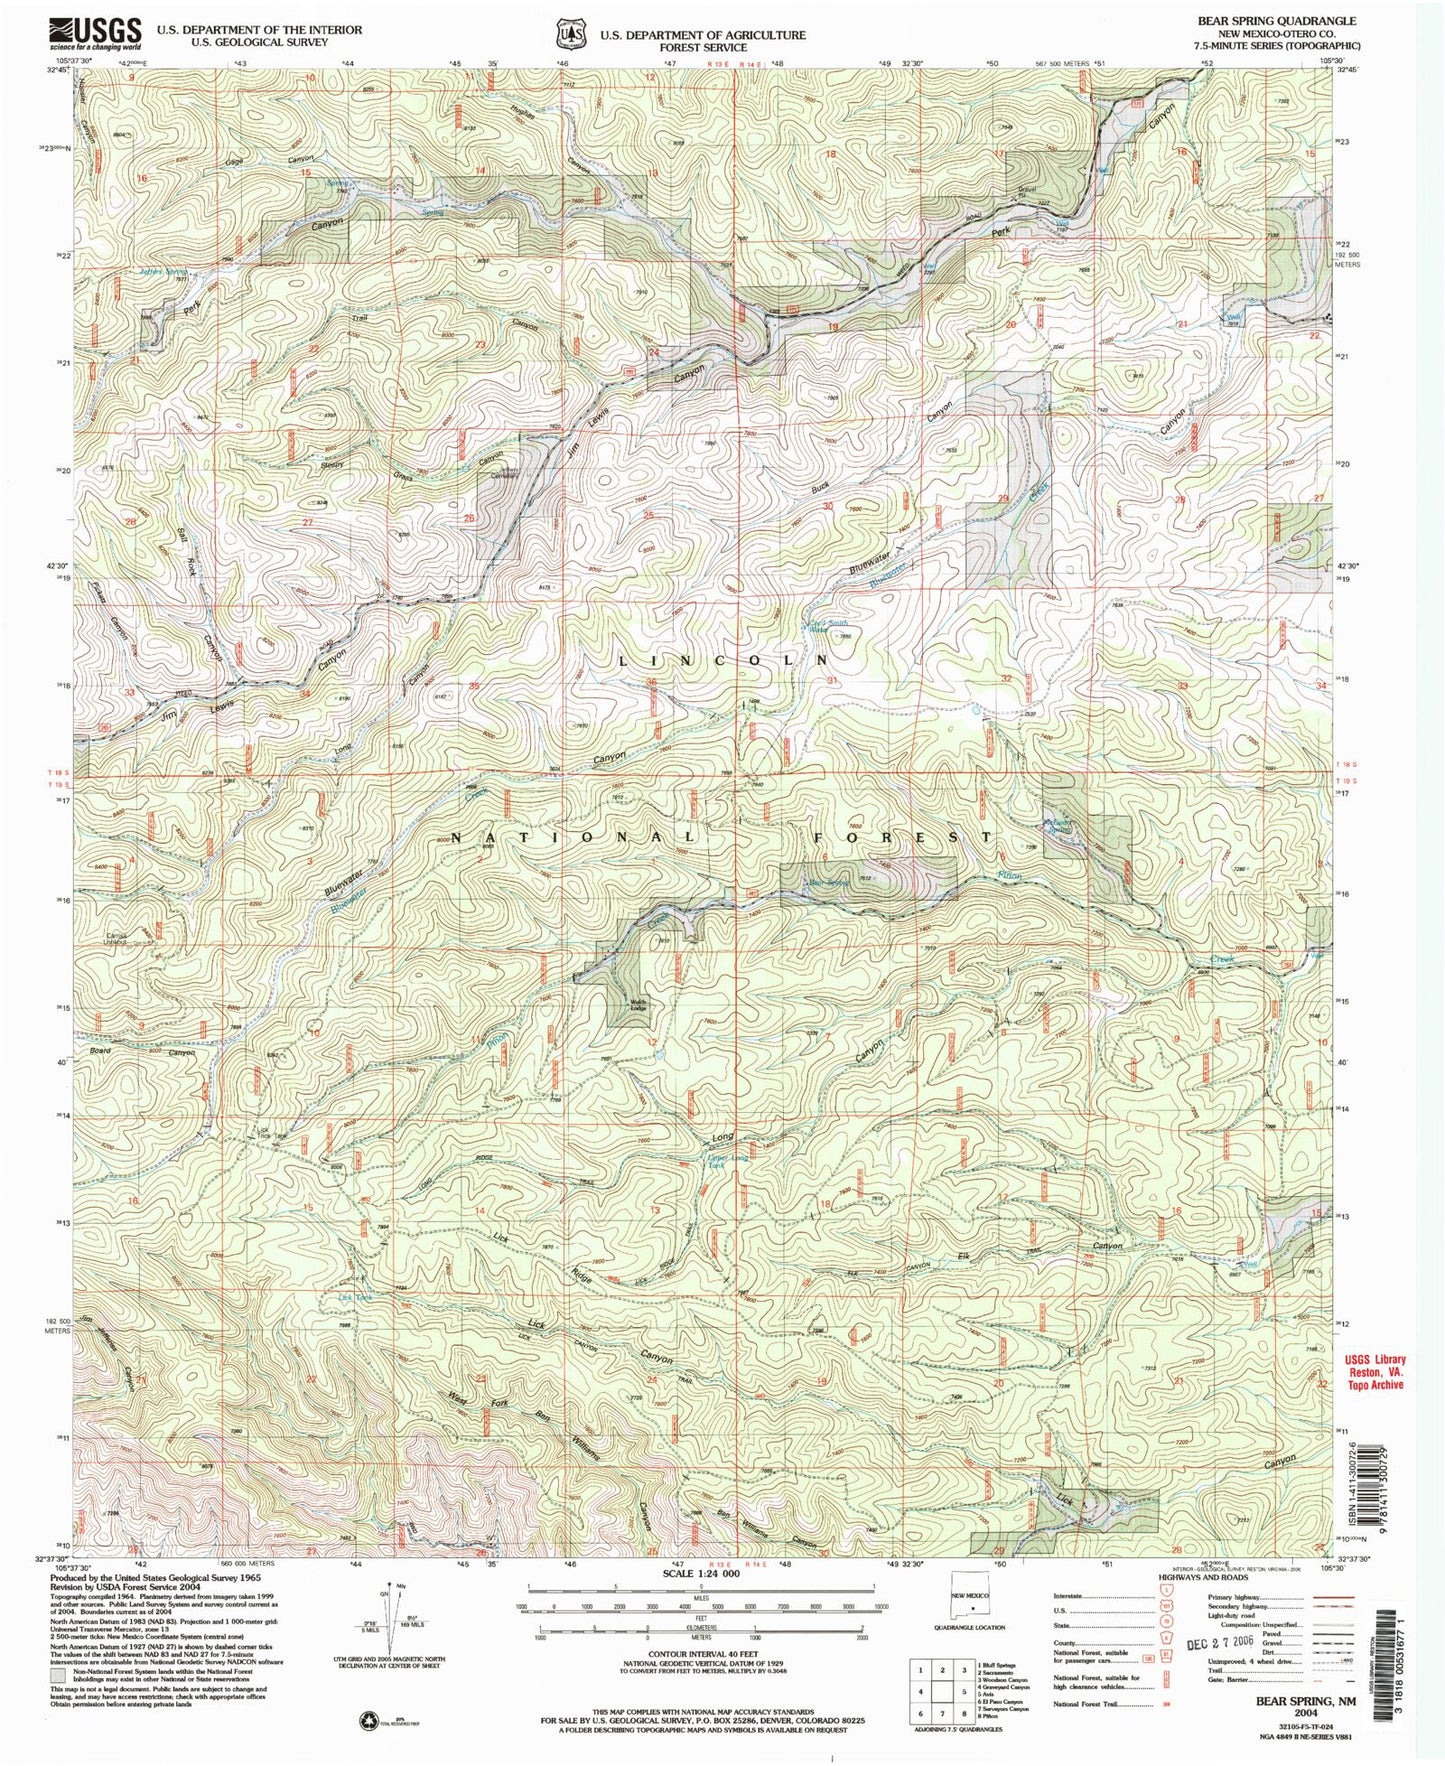 USGS Classic Bear Spring New Mexico 7.5'x7.5' Topo Map Image